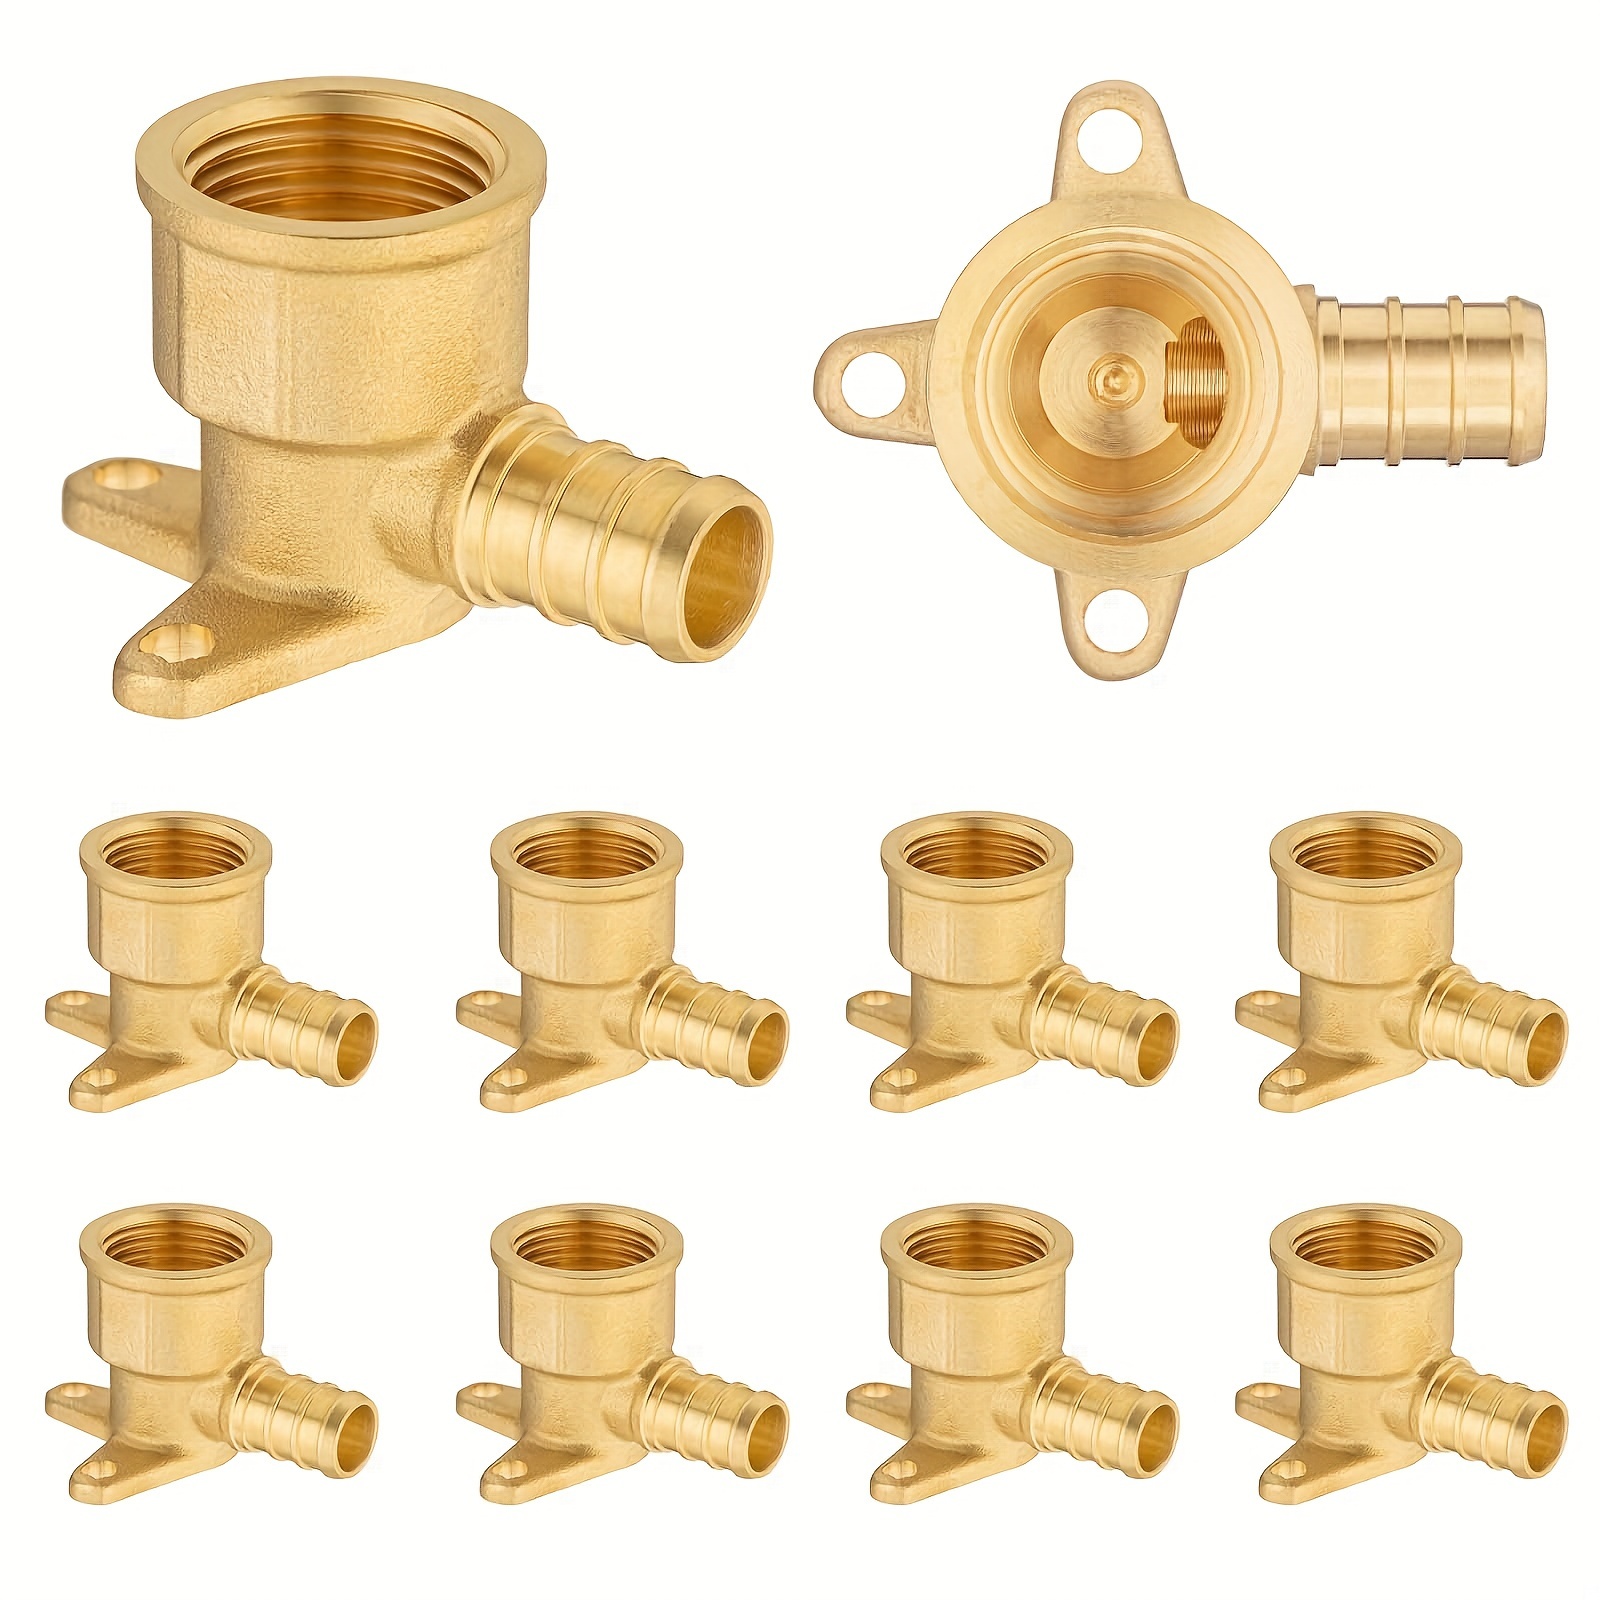 2 PCS 3/8 Compression Tee Fittings Water Line Splitter Angle Stop Add-A-Tee  Valve Lead-Free Brass 3 Way Valve 3/8-Inch Compression Inlet X 3/8-Inch